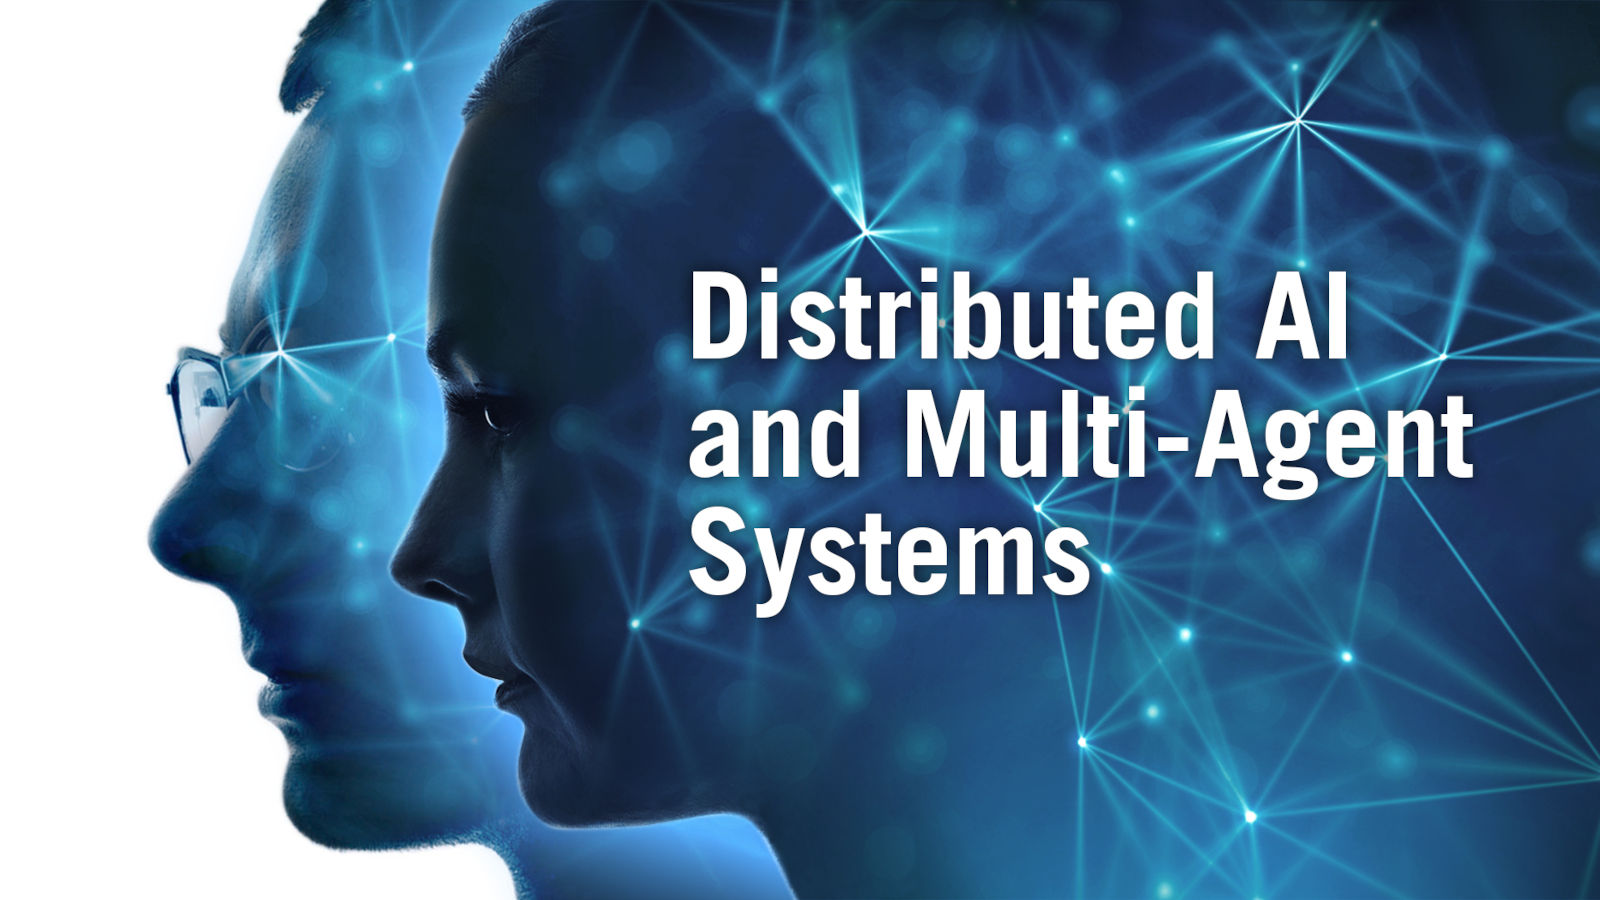 Distributed AI and Multi-Agent Systems